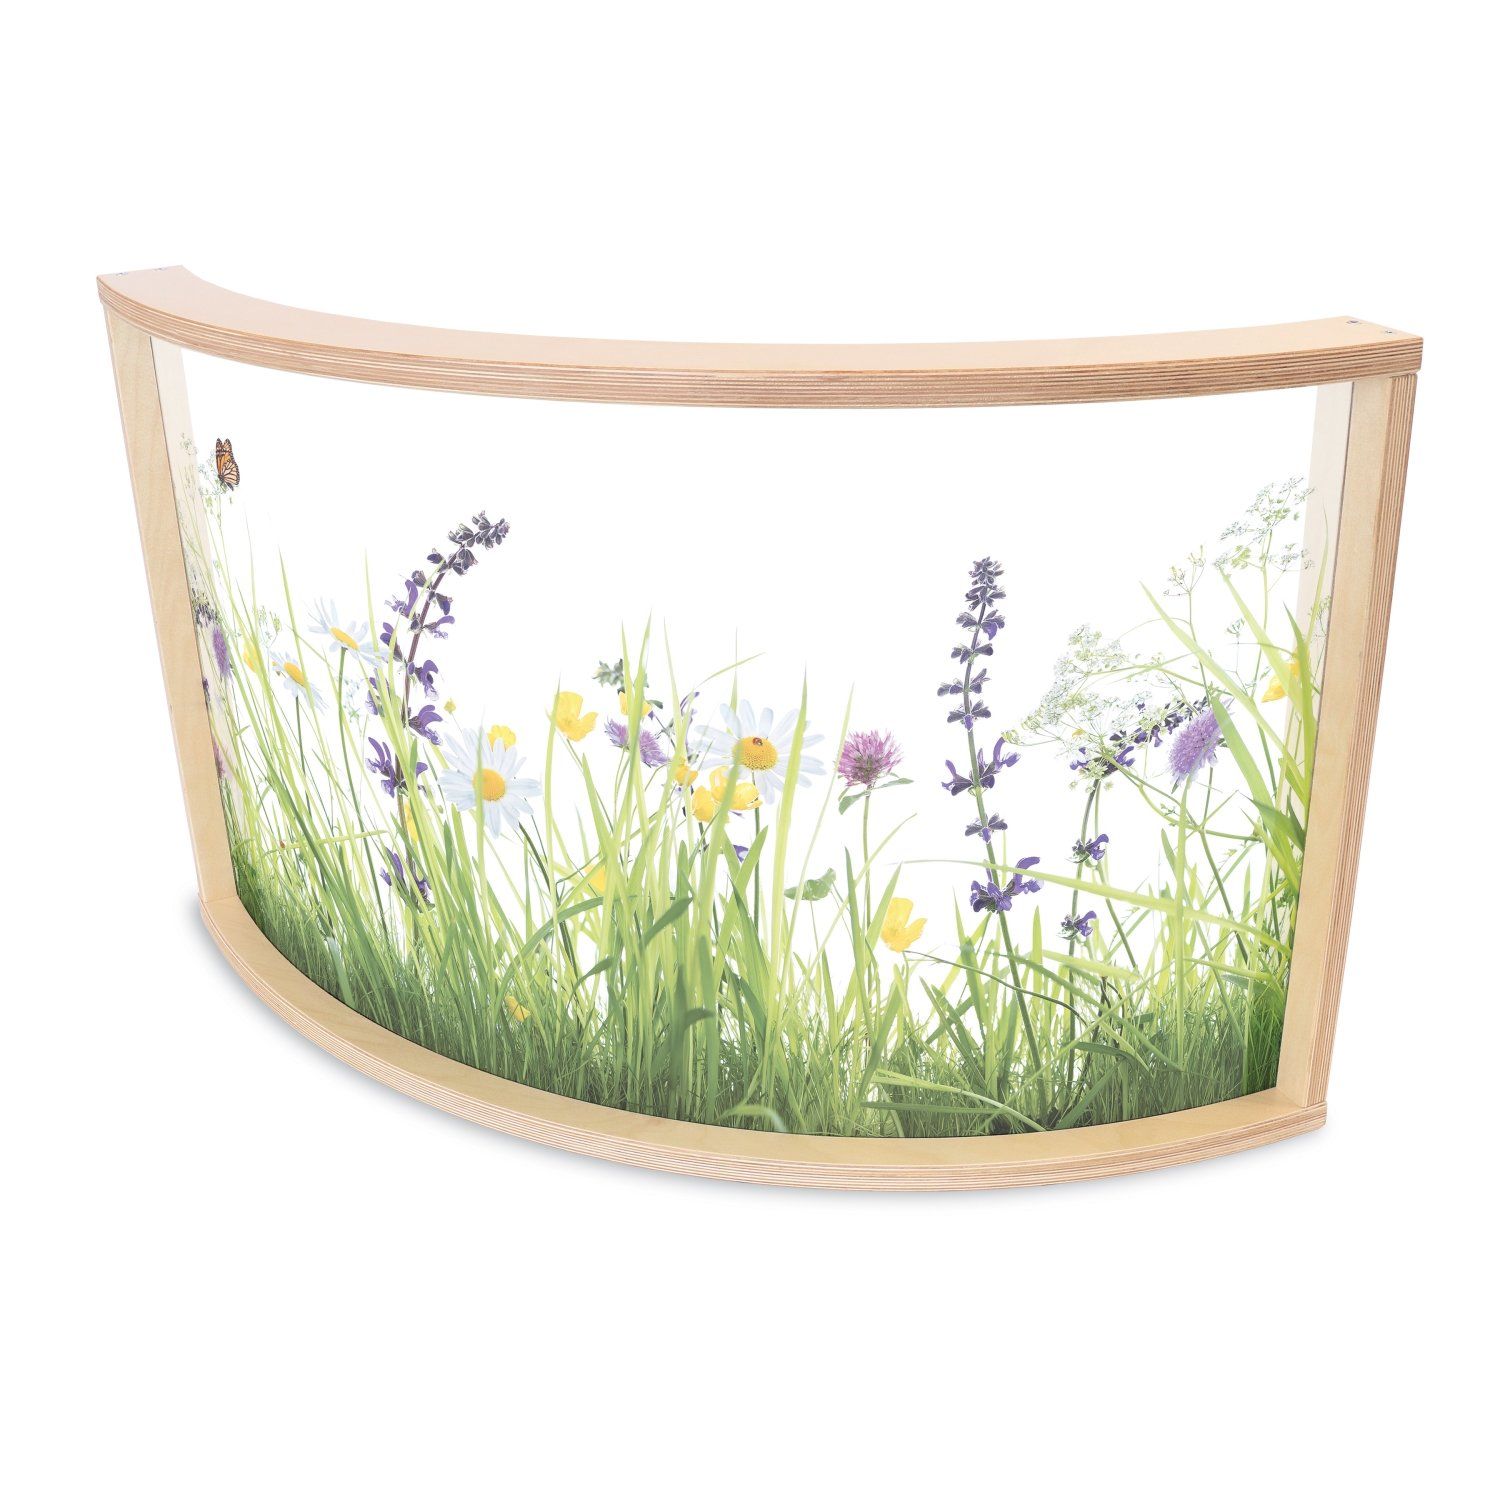 Nature View Curved Divider Panel 24"H - louisekool